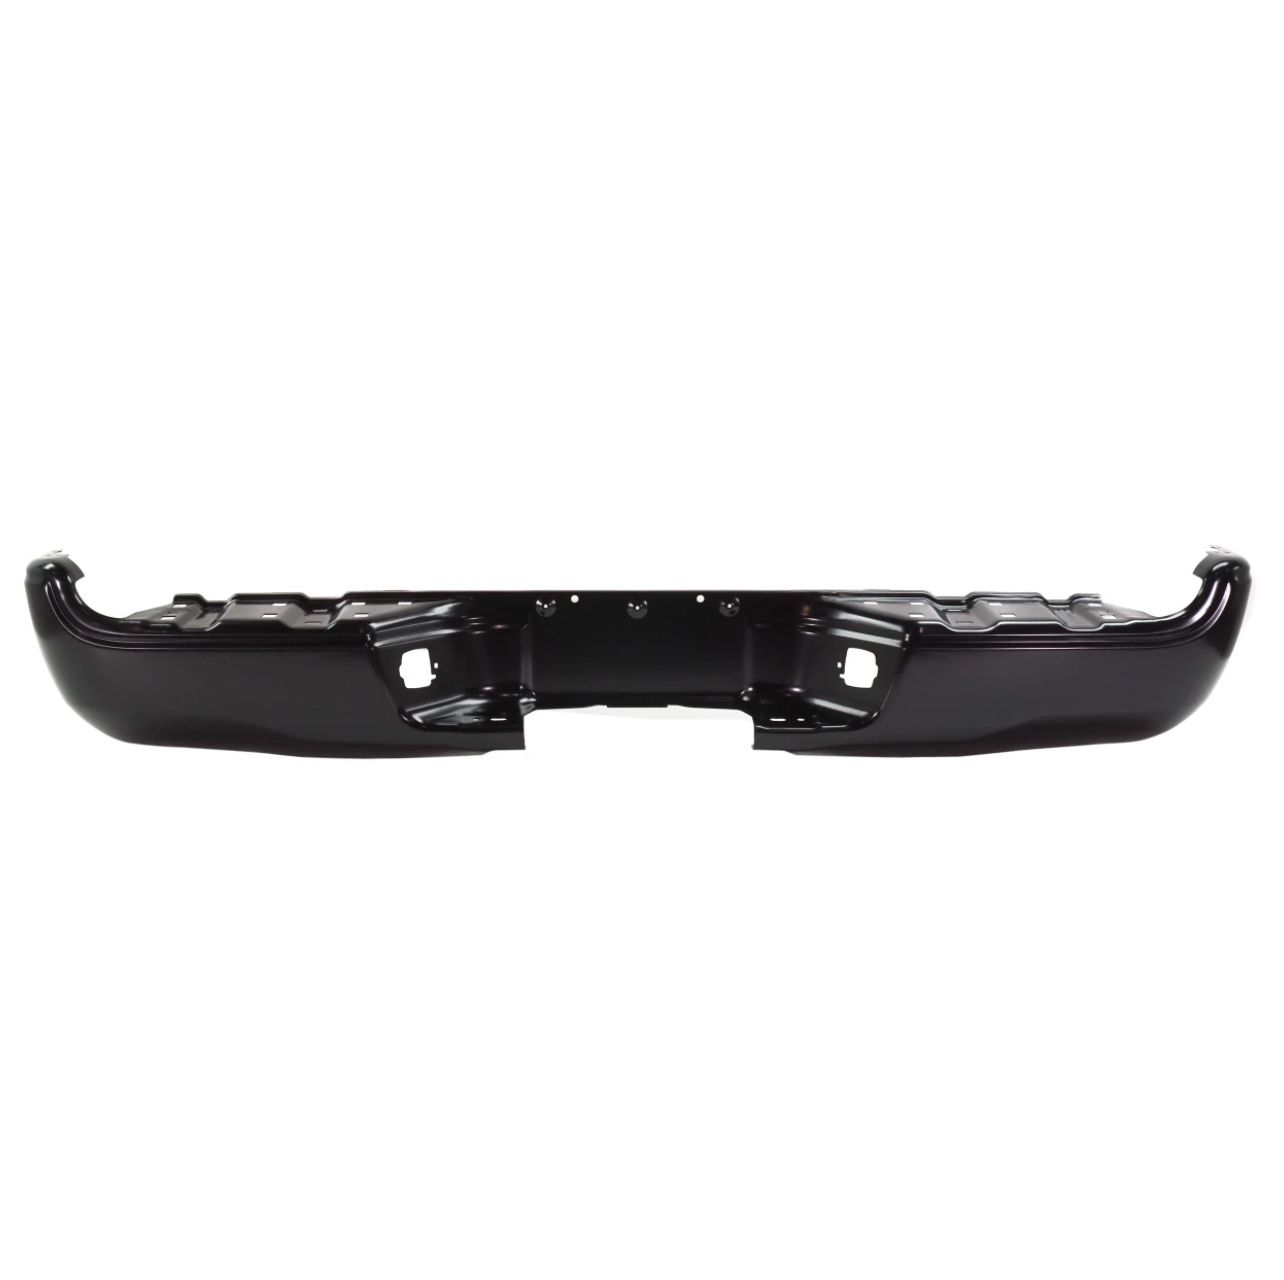 BRAND NEW* Evan-fisher step bumper compatible with toyota tacoma 